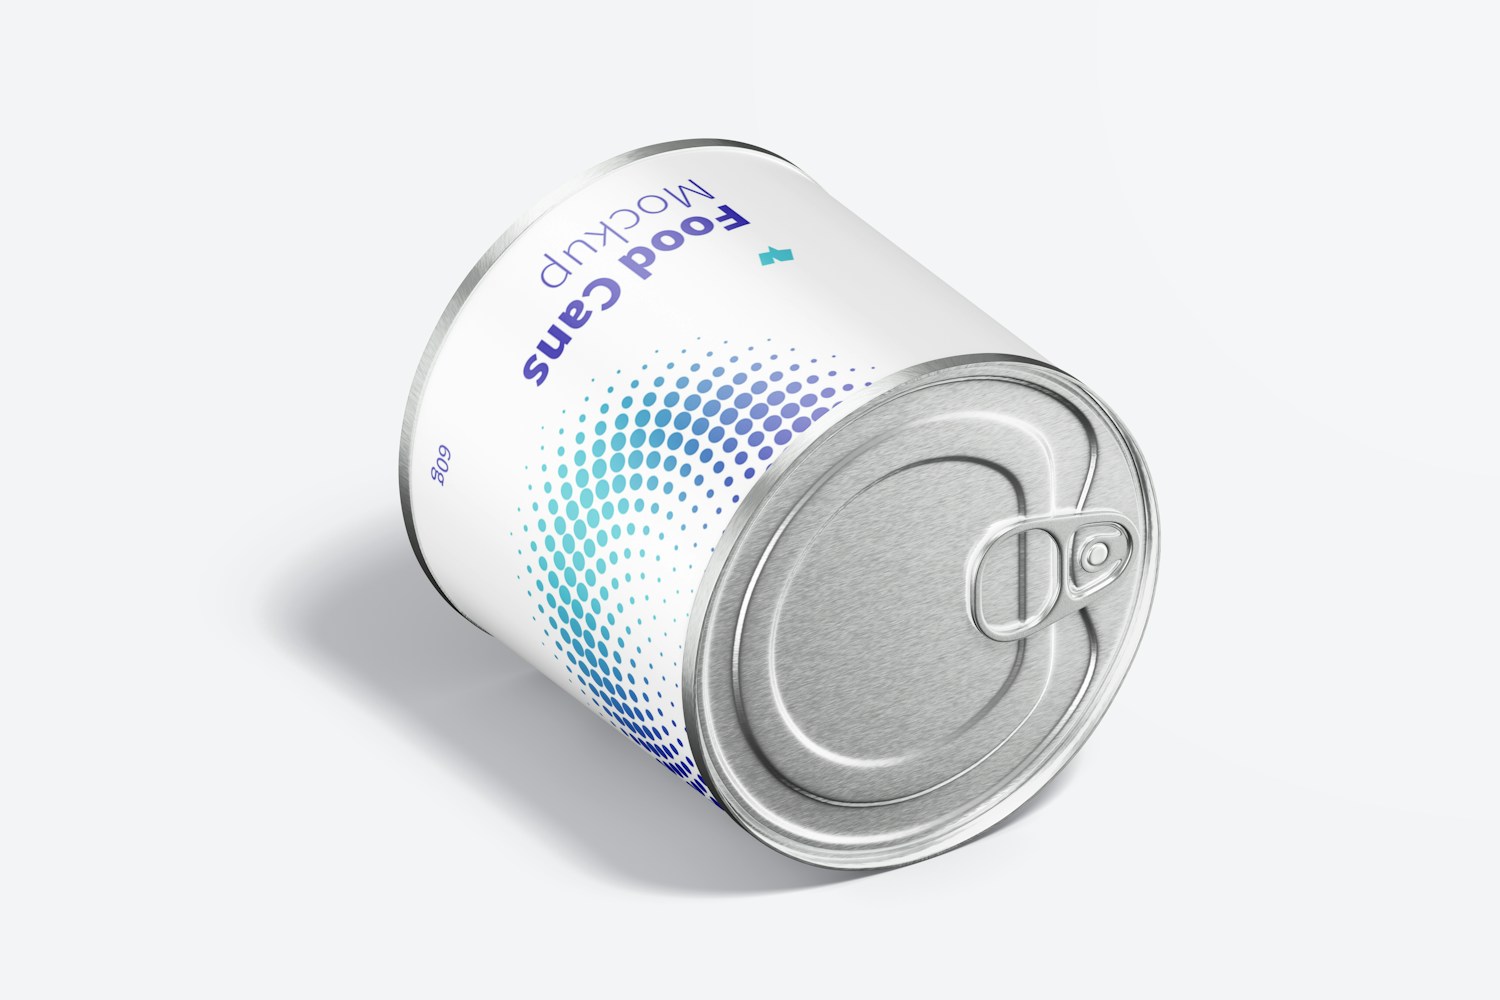 60g Food Can Mockup, Isometric Right View